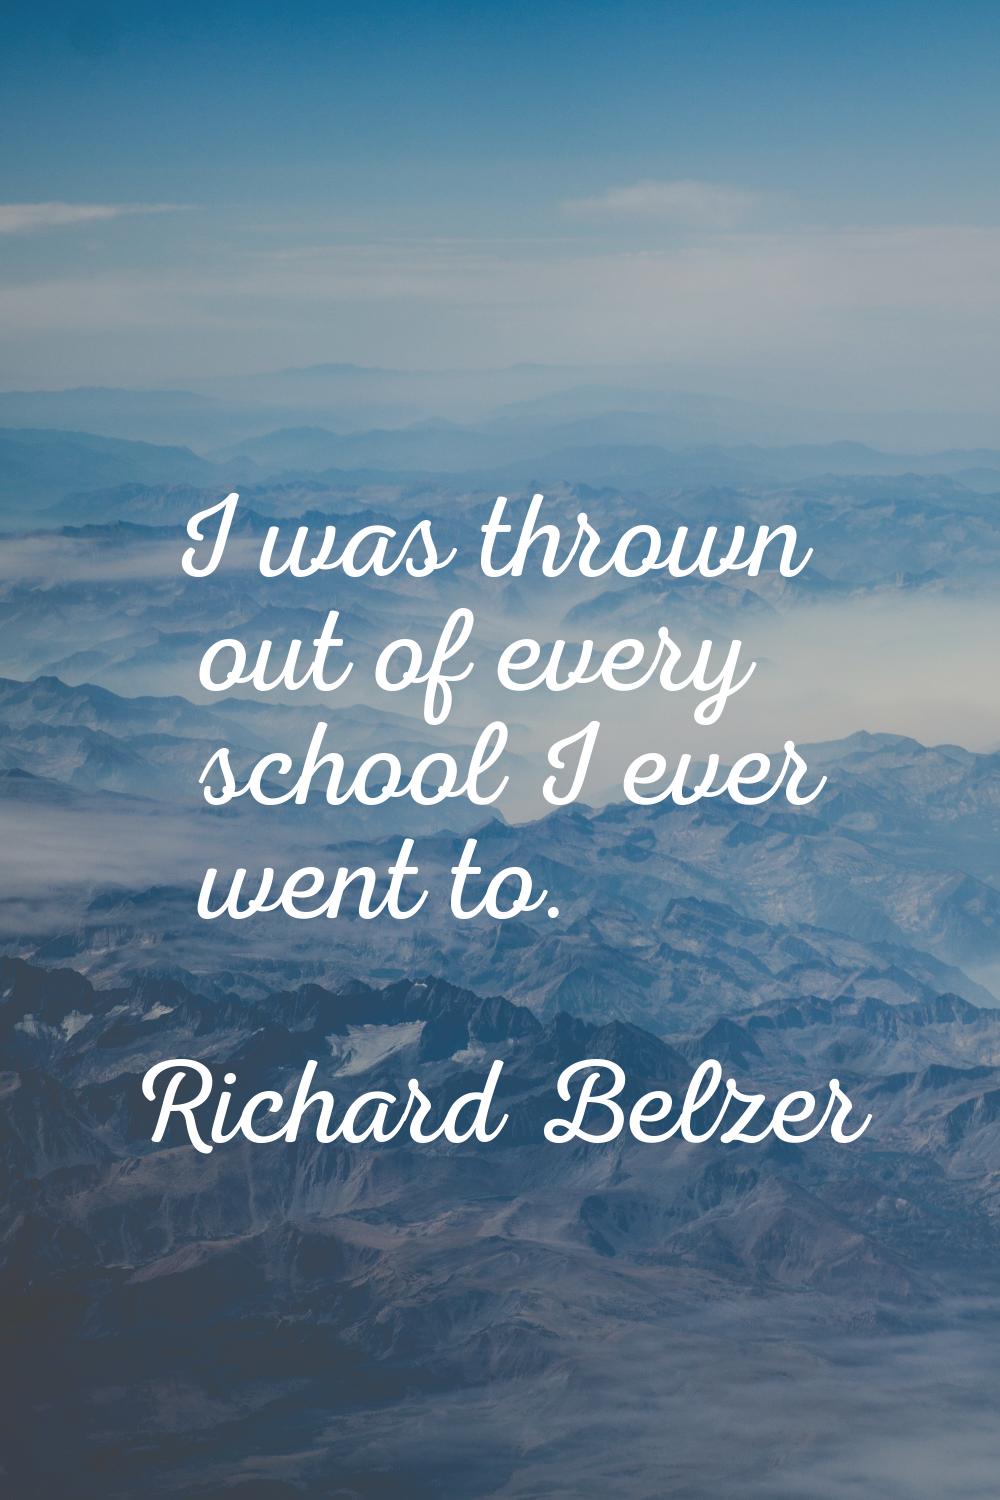 I was thrown out of every school I ever went to.